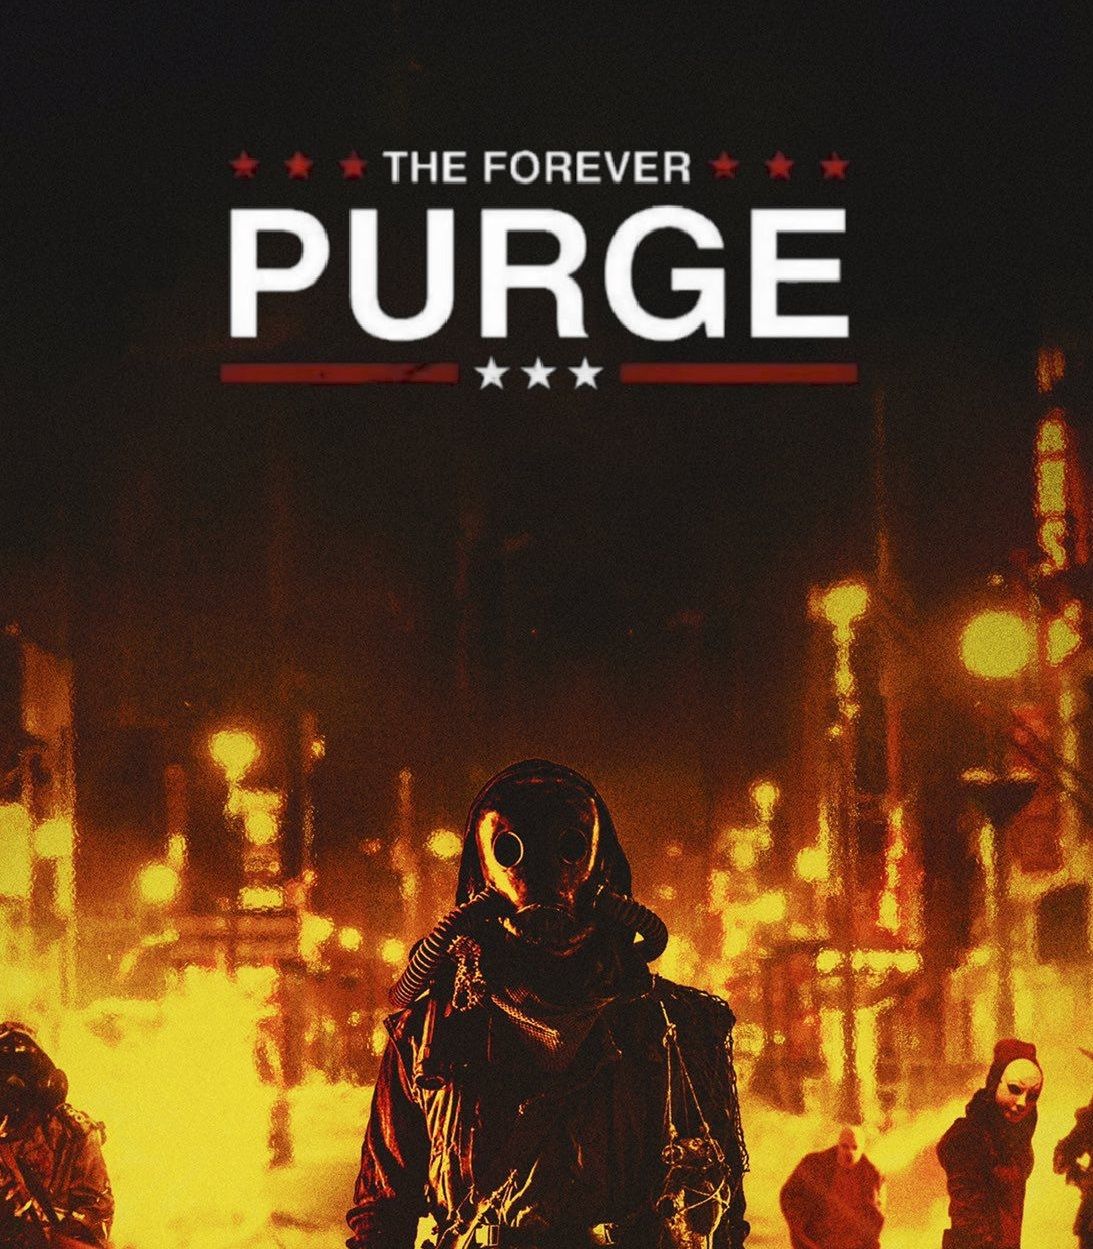 Poster for The Forever Purge